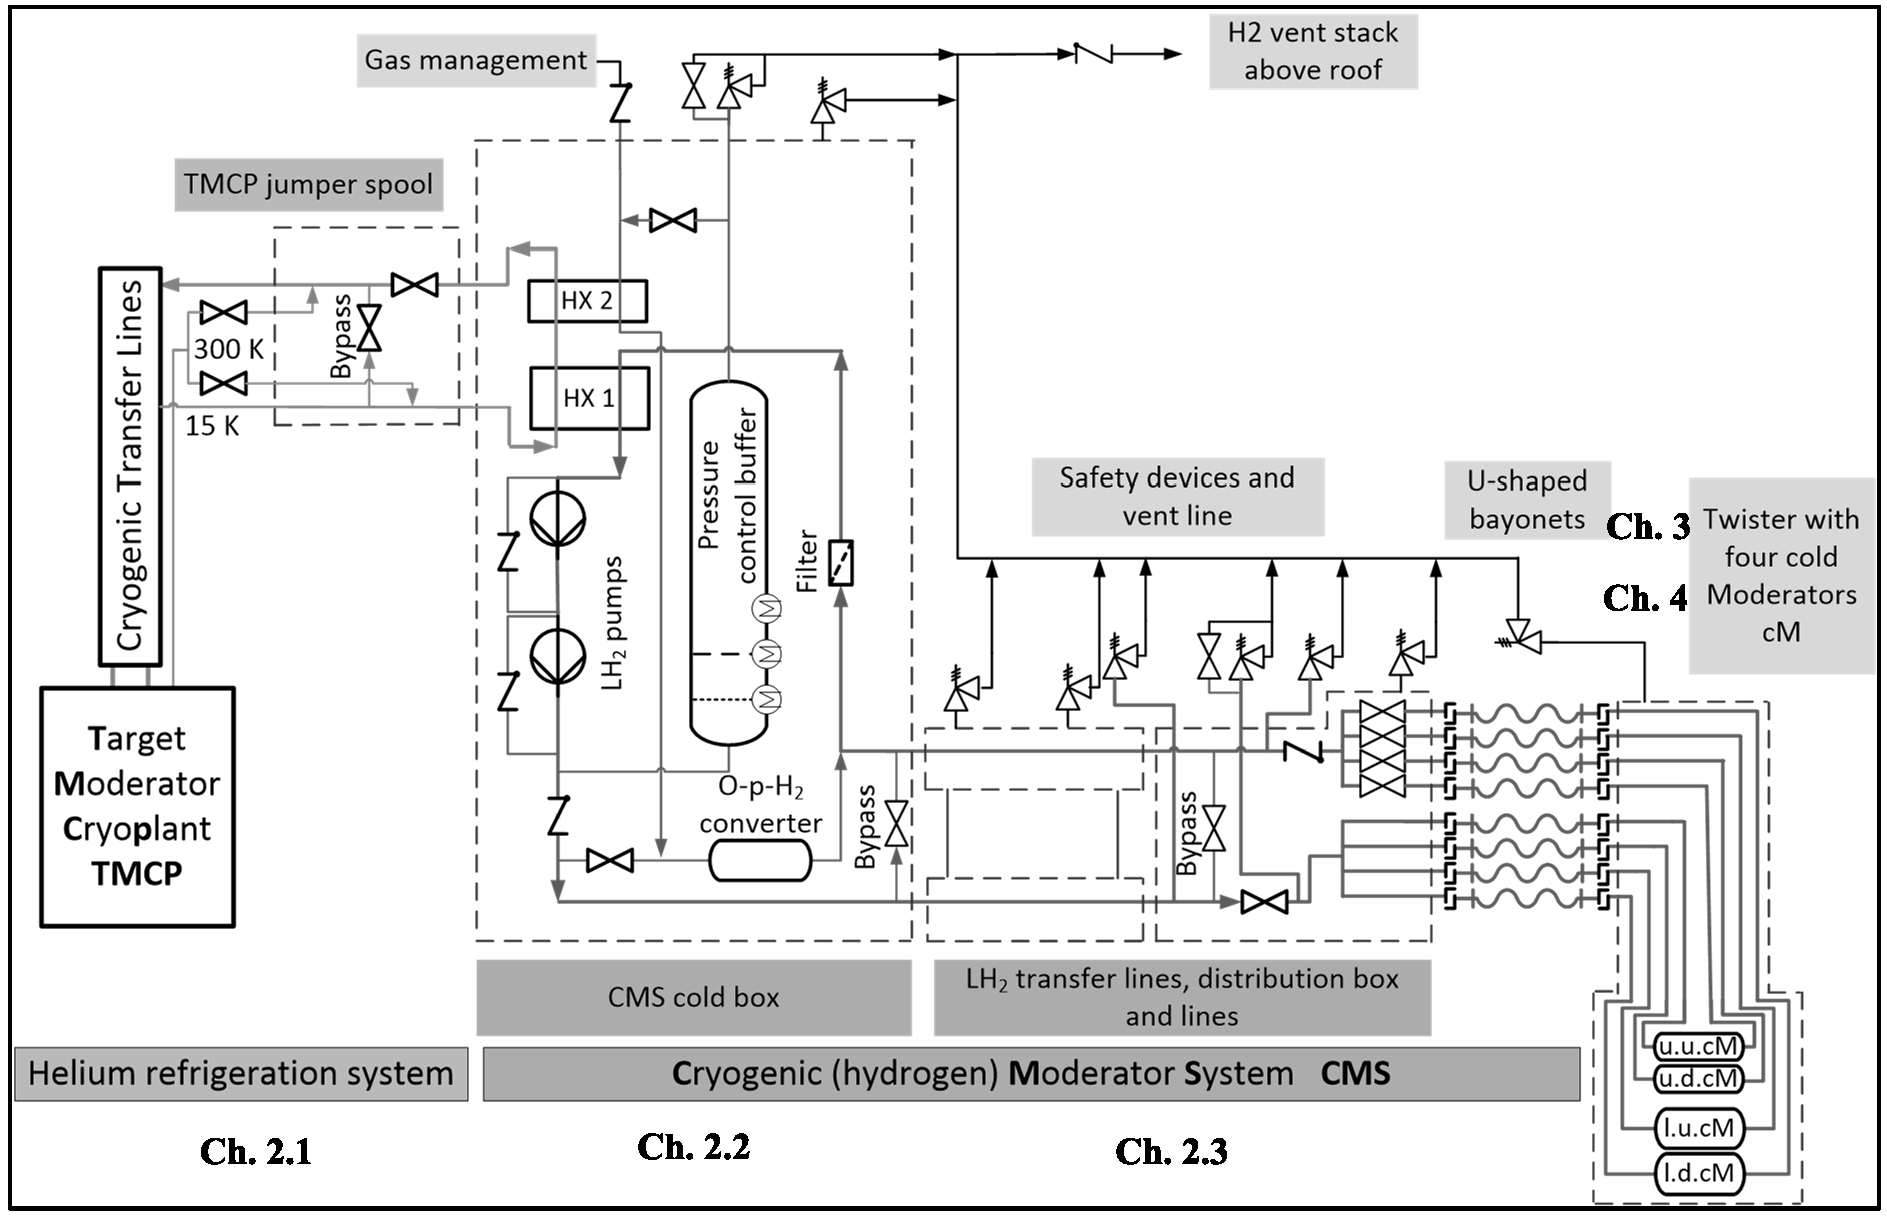 Simplified schematic flow diagram of ESS cryogenic Moderator cooling infrastructure, left: Target Moderator Cryoplant (TMCP) consists of helium refrigeration system and the helium transfer lines (Ch. 2.1); right: Cryogenic Moderator System (CMS) consist of the CMS cold box (Ch. 2.2), LH2 transfer lines (Ch. 2.3) and the Twister (Ch. 3) with up to four hydrogen Moderators (Ch. 4) [4].